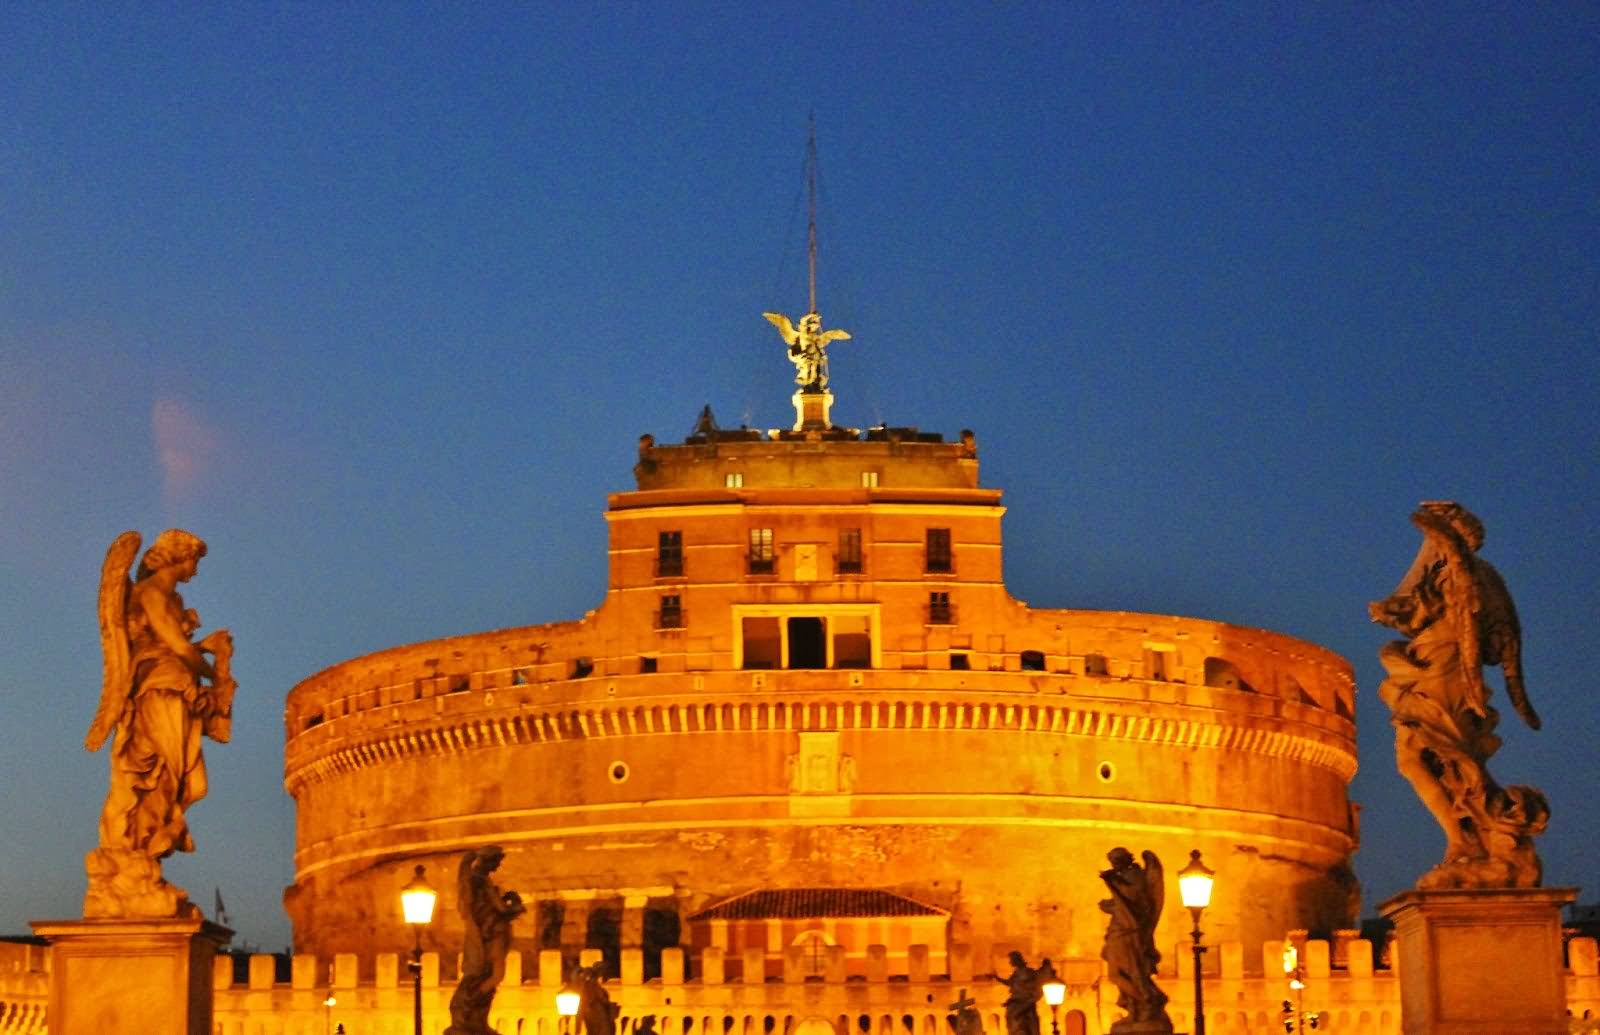 Front View Of Castel Sant'Angelo Night Image